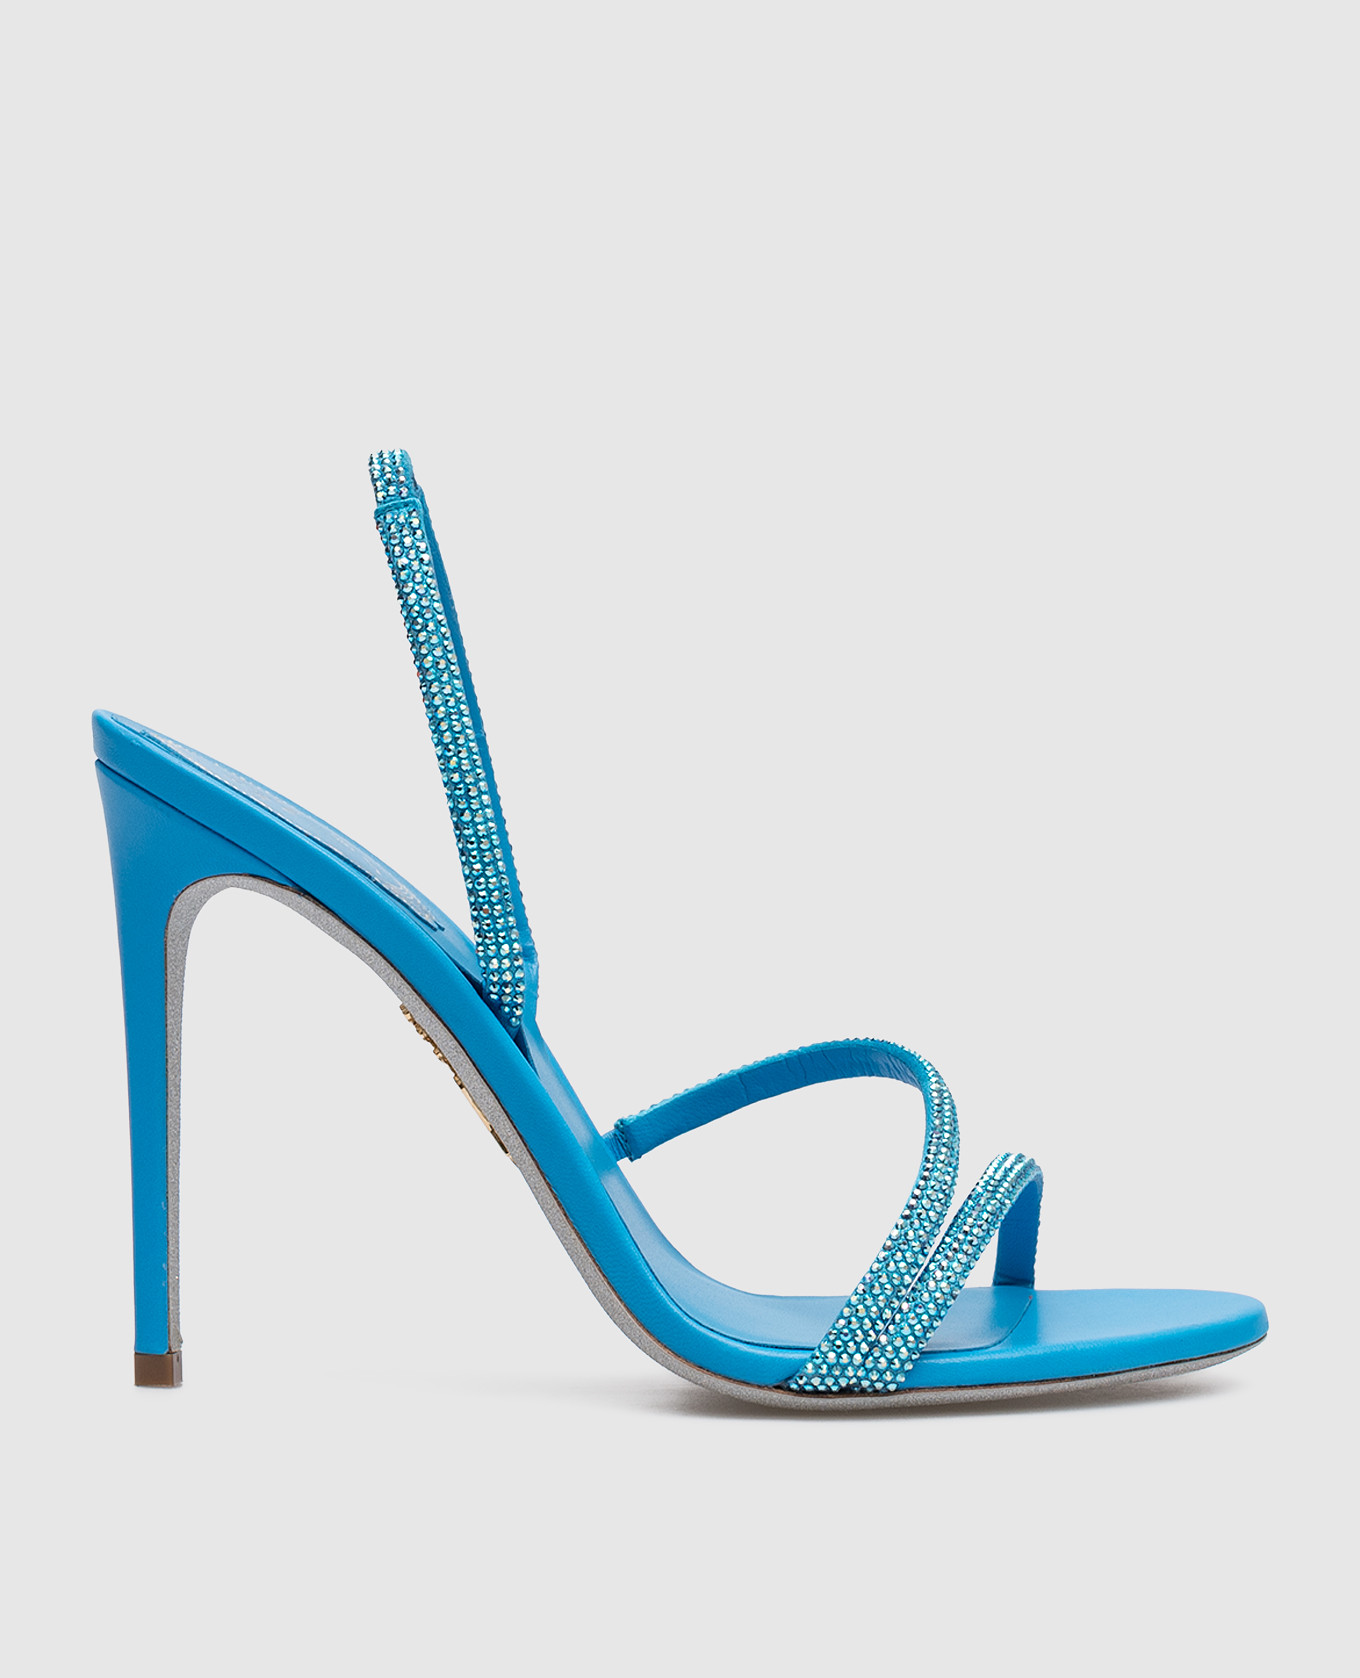 Blue Irina sandals with crystals